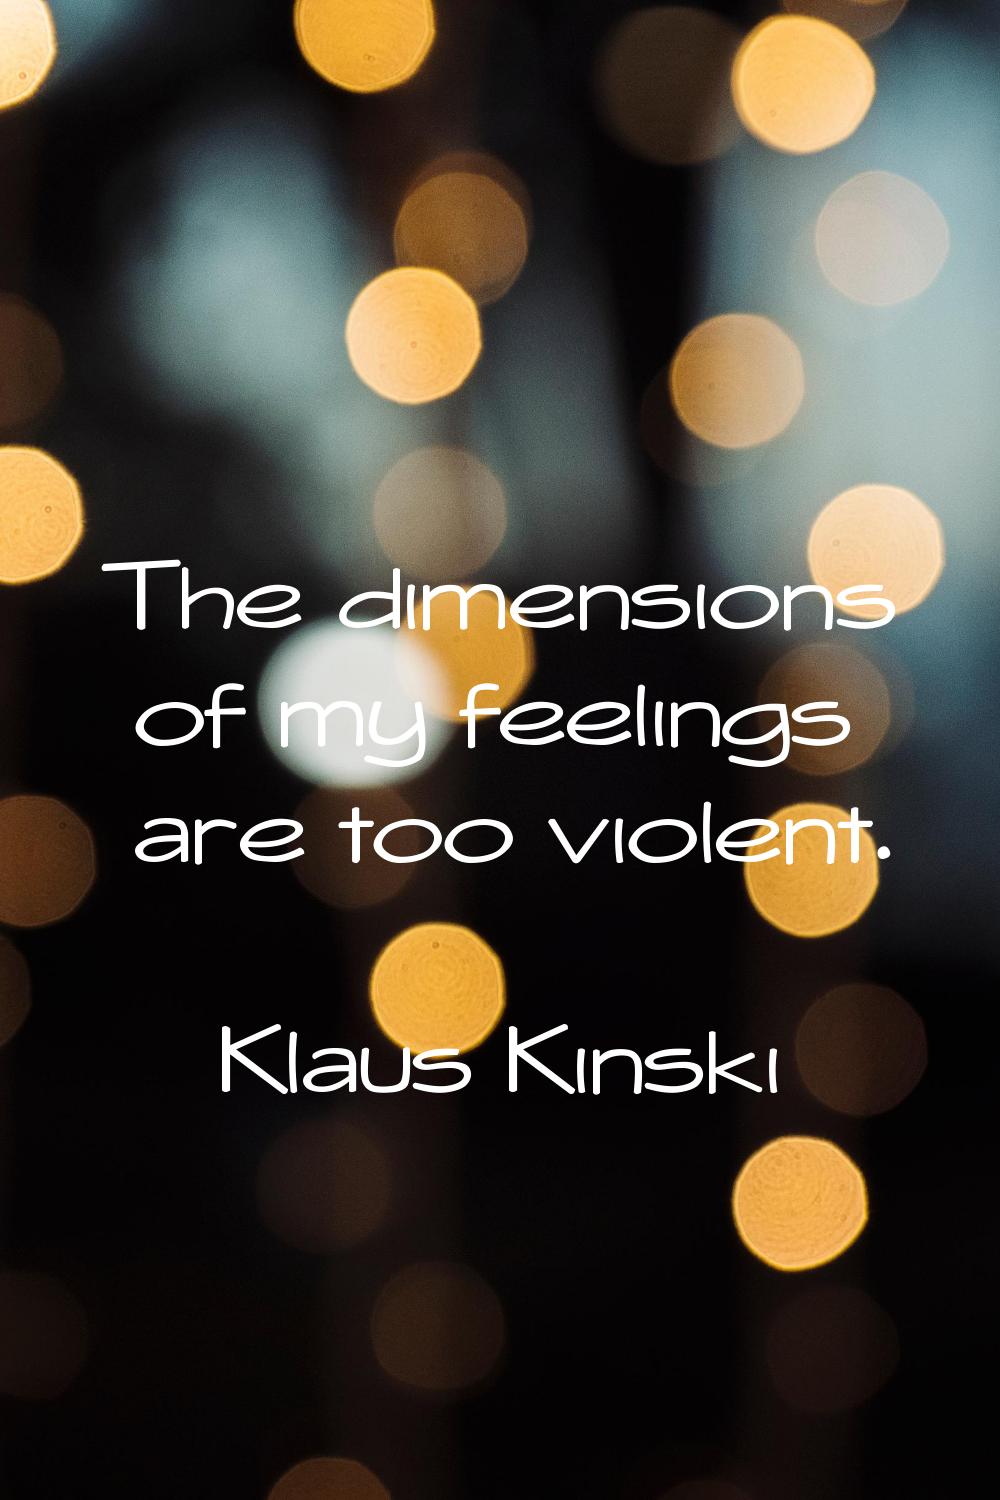 The dimensions of my feelings are too violent.